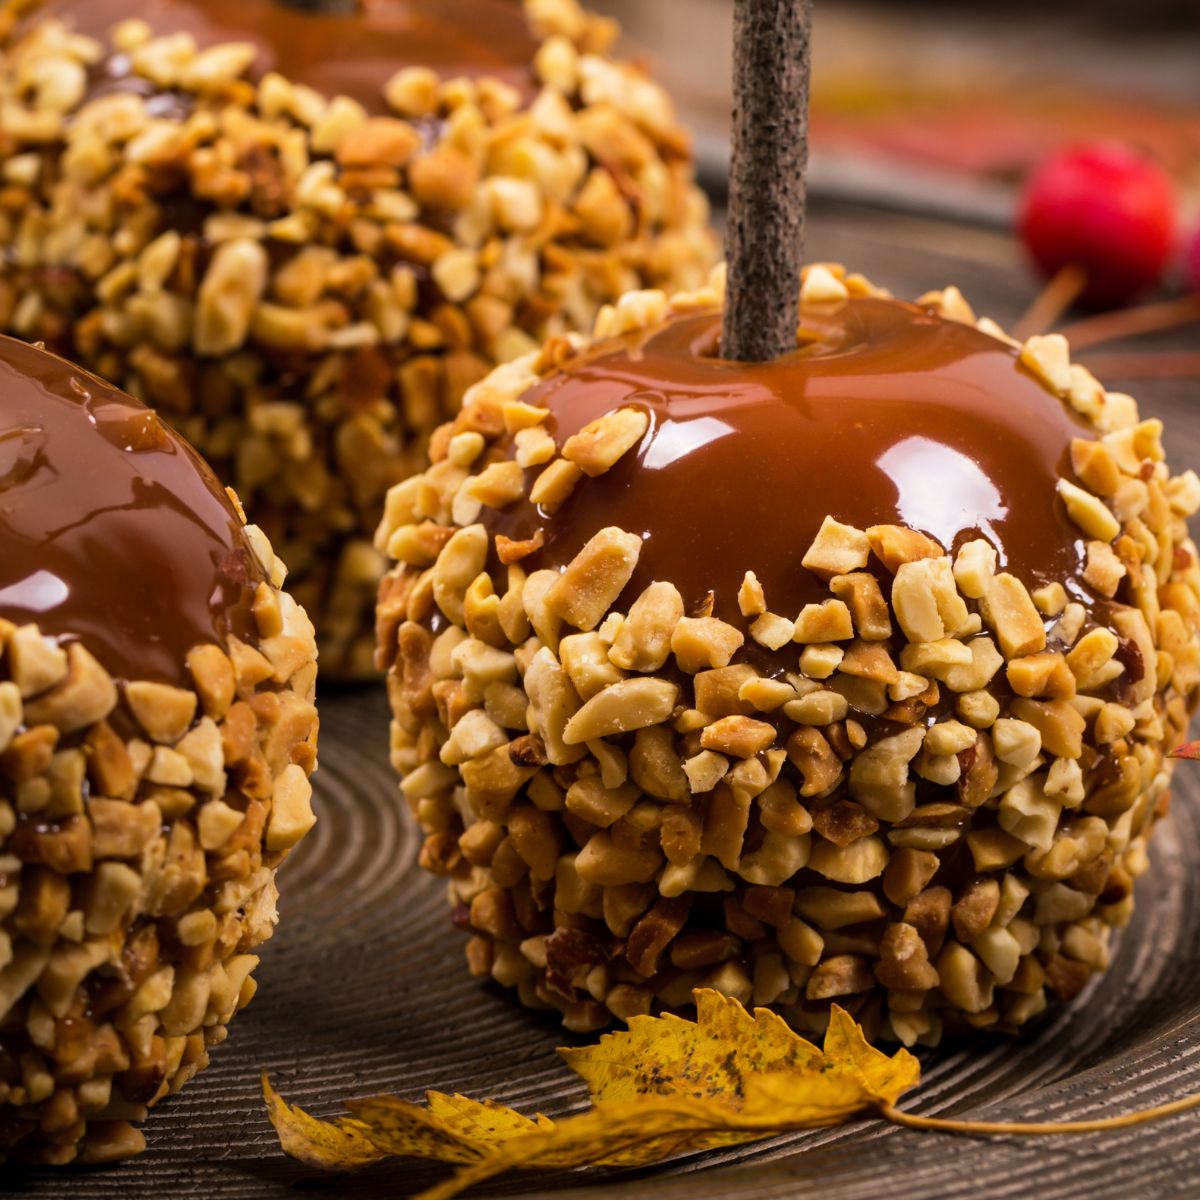 candied apples covered in nuts